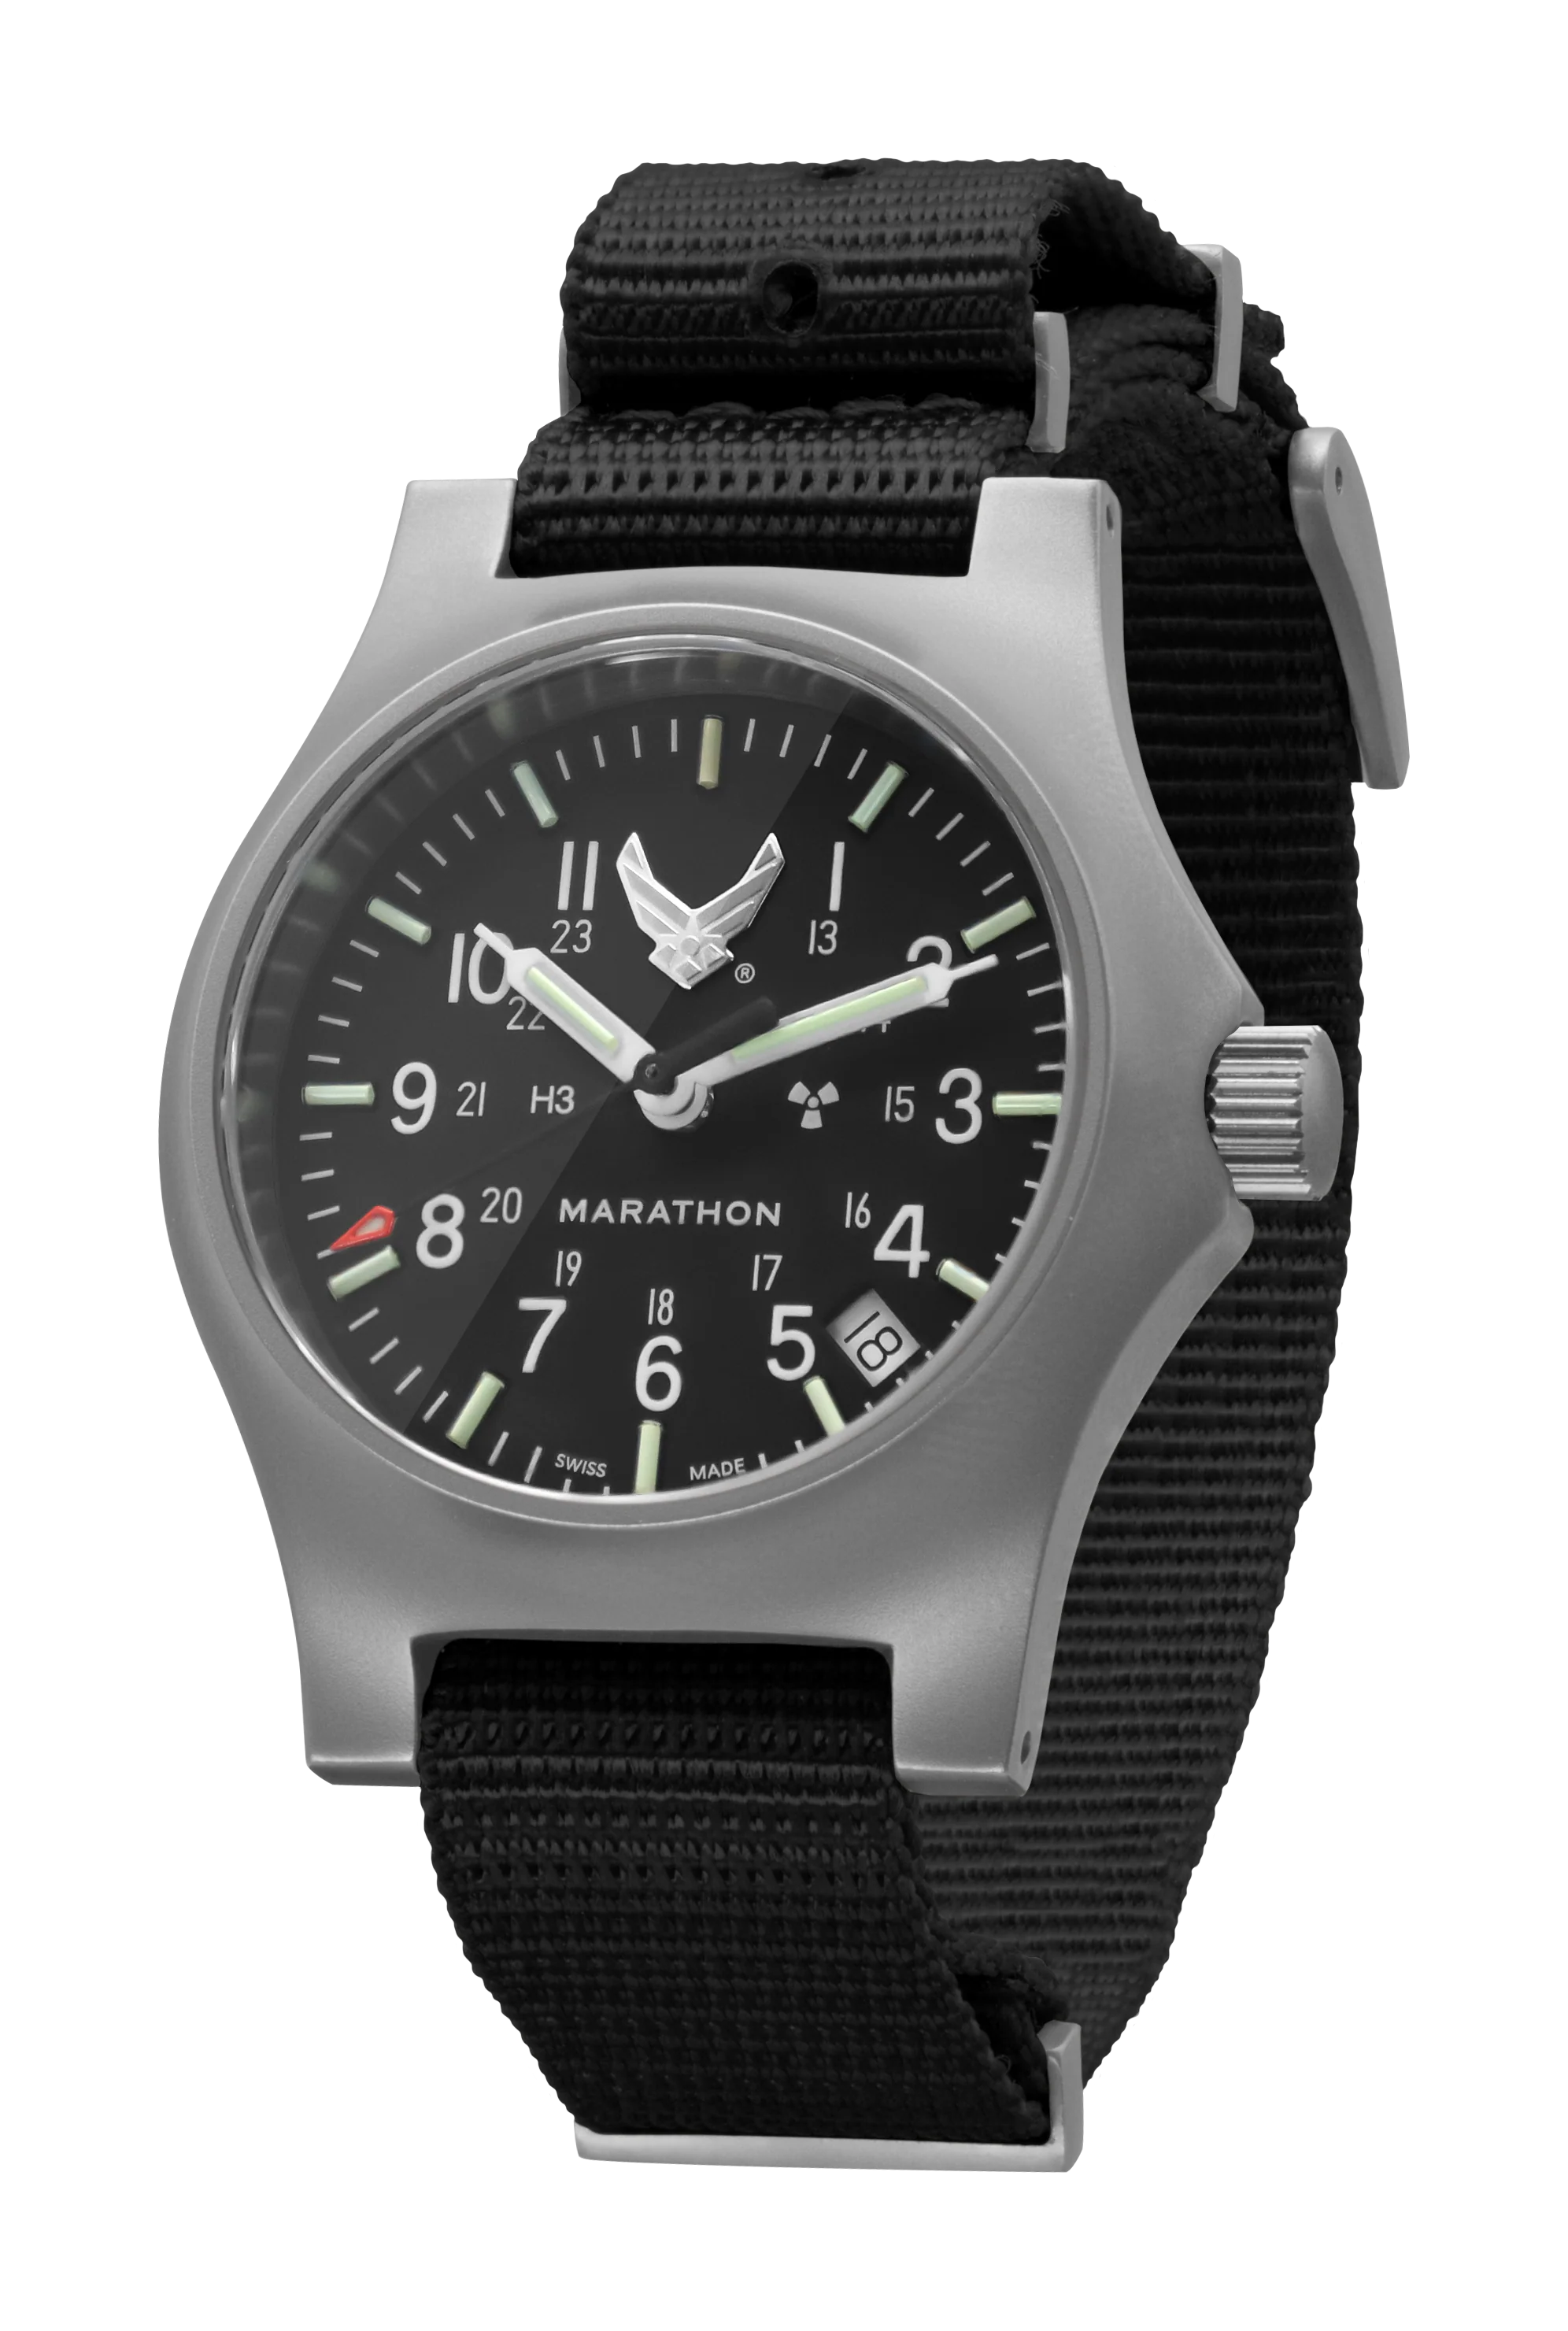 Official United States Air Force Officer's Watch